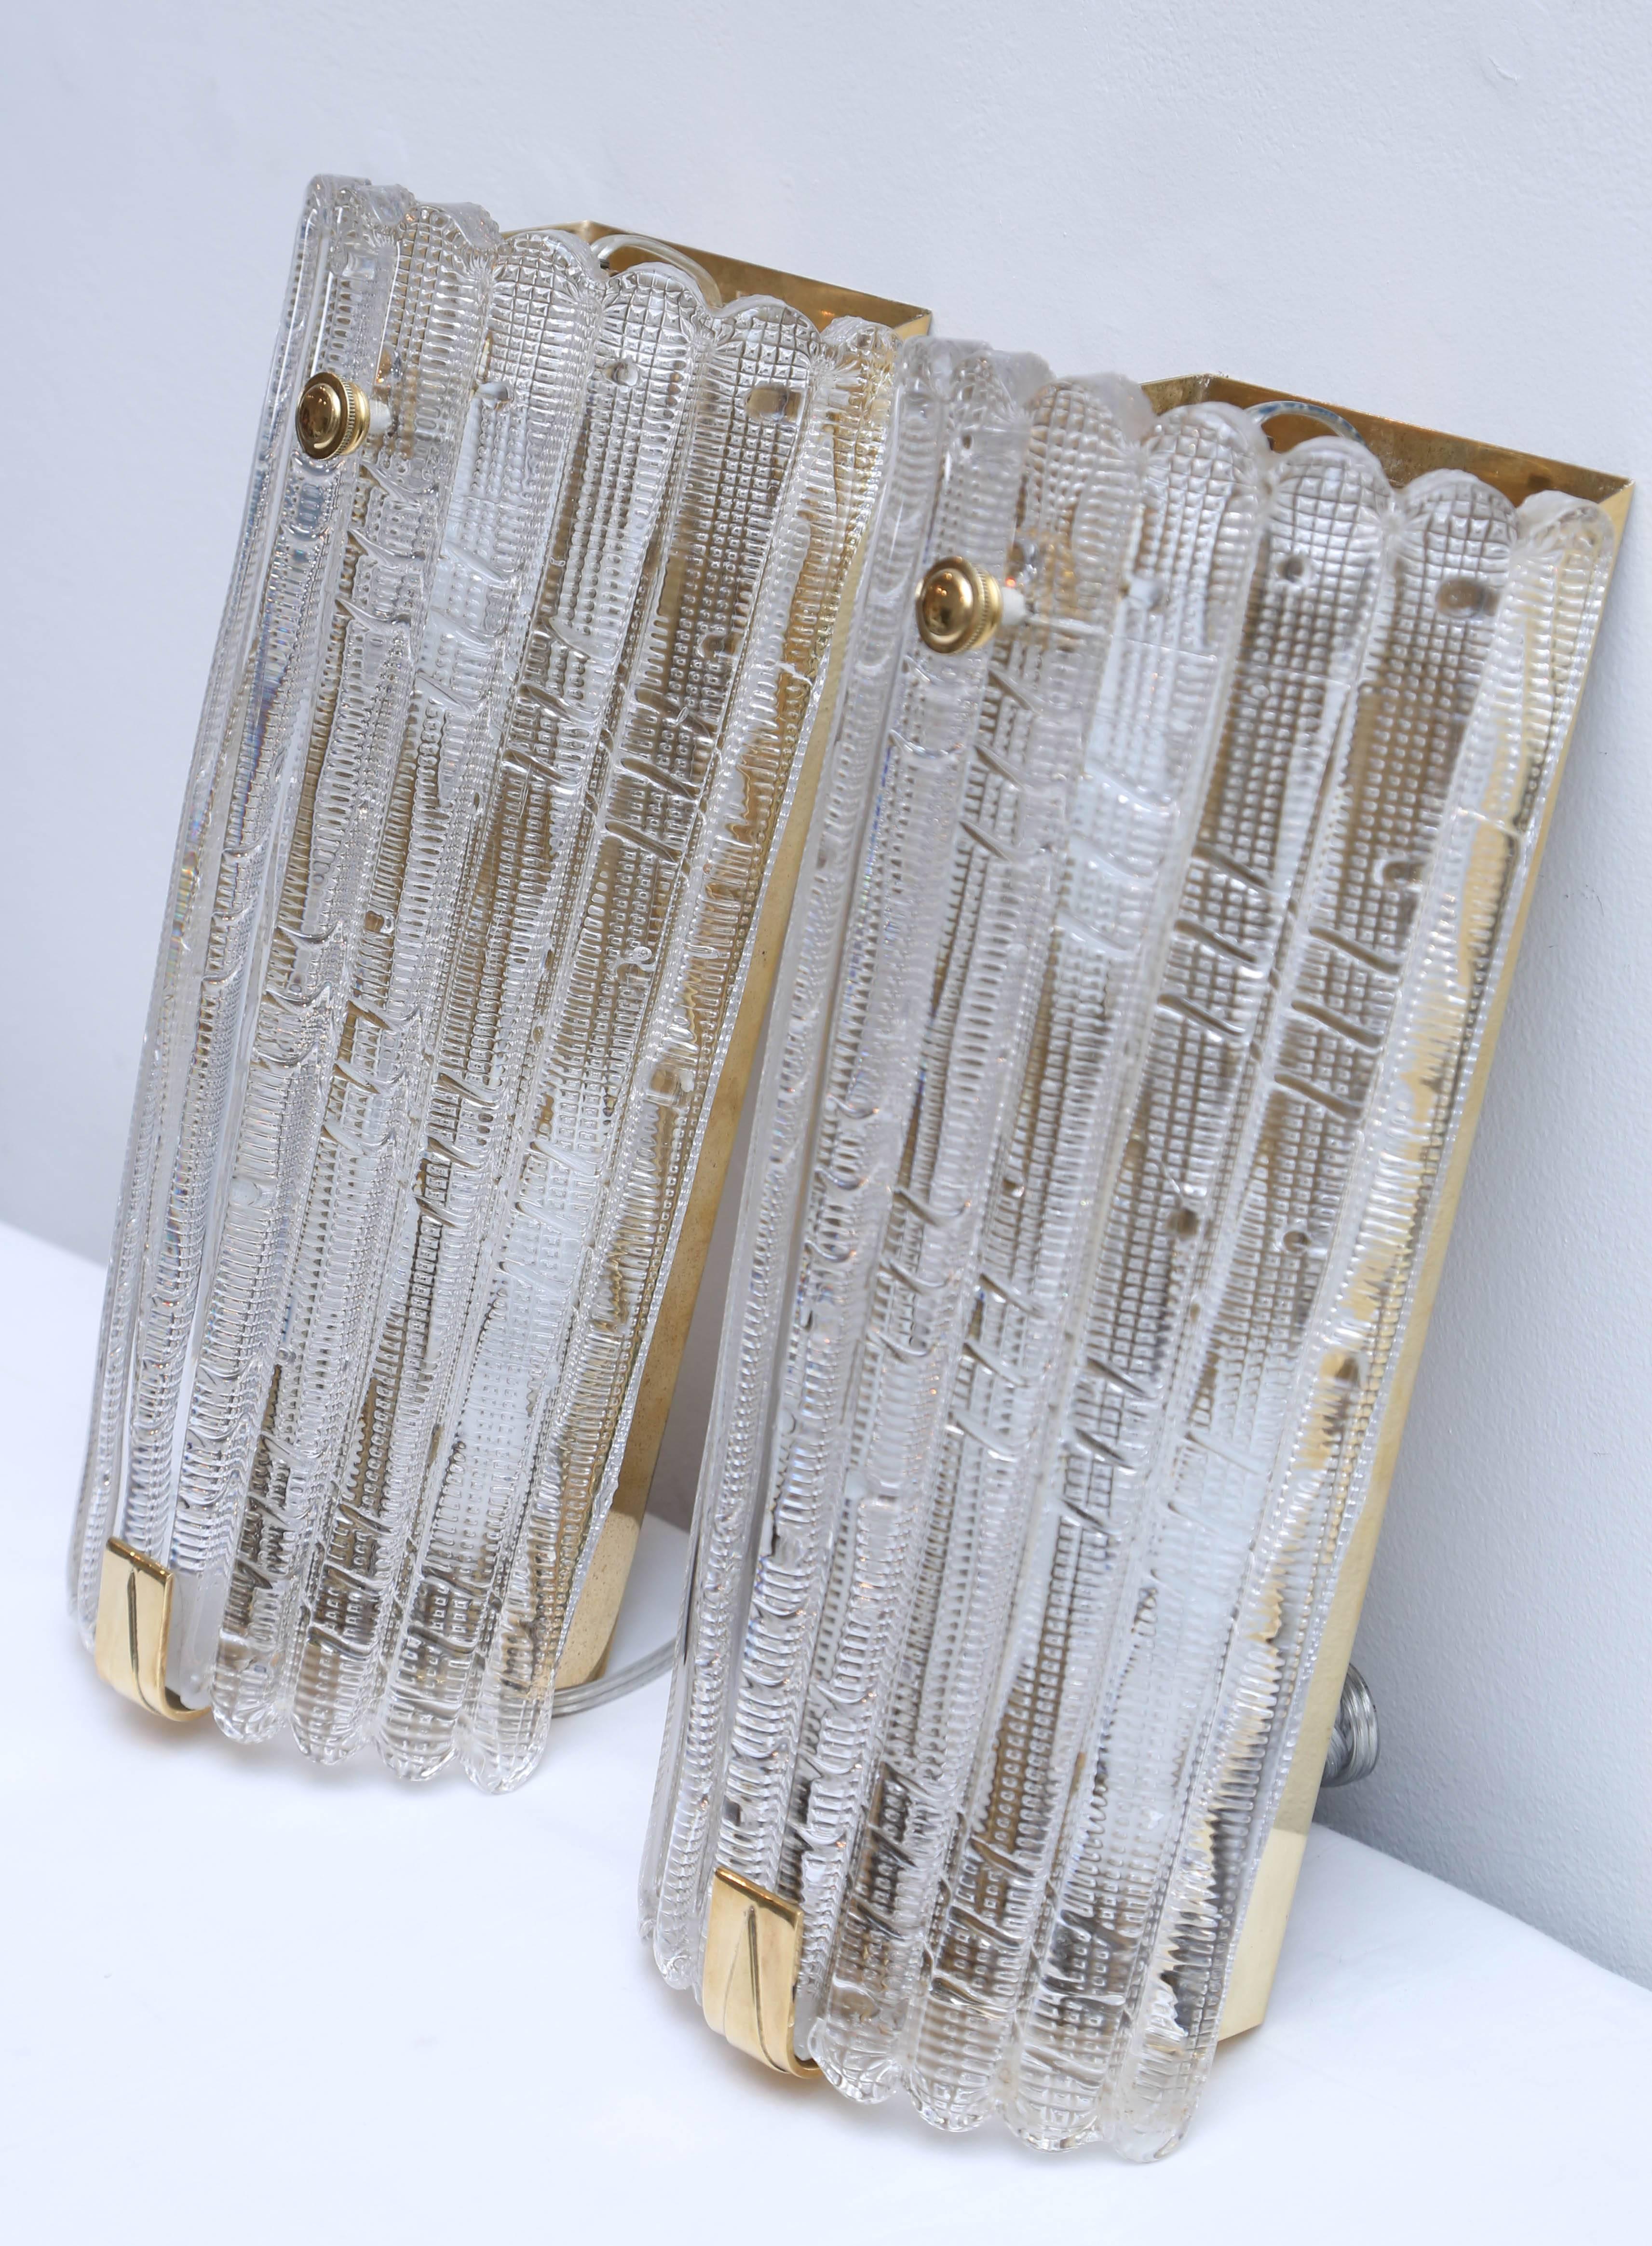 Pair of unique large Orrefors crystal wall sconces by Carl Fagerlund, Sweden,
circa 1960s, Classic carved textured and diagonal pattern on large crystal 
fluted clear crystal covers, Brass backplates and lovely substantial brass
brackets and round